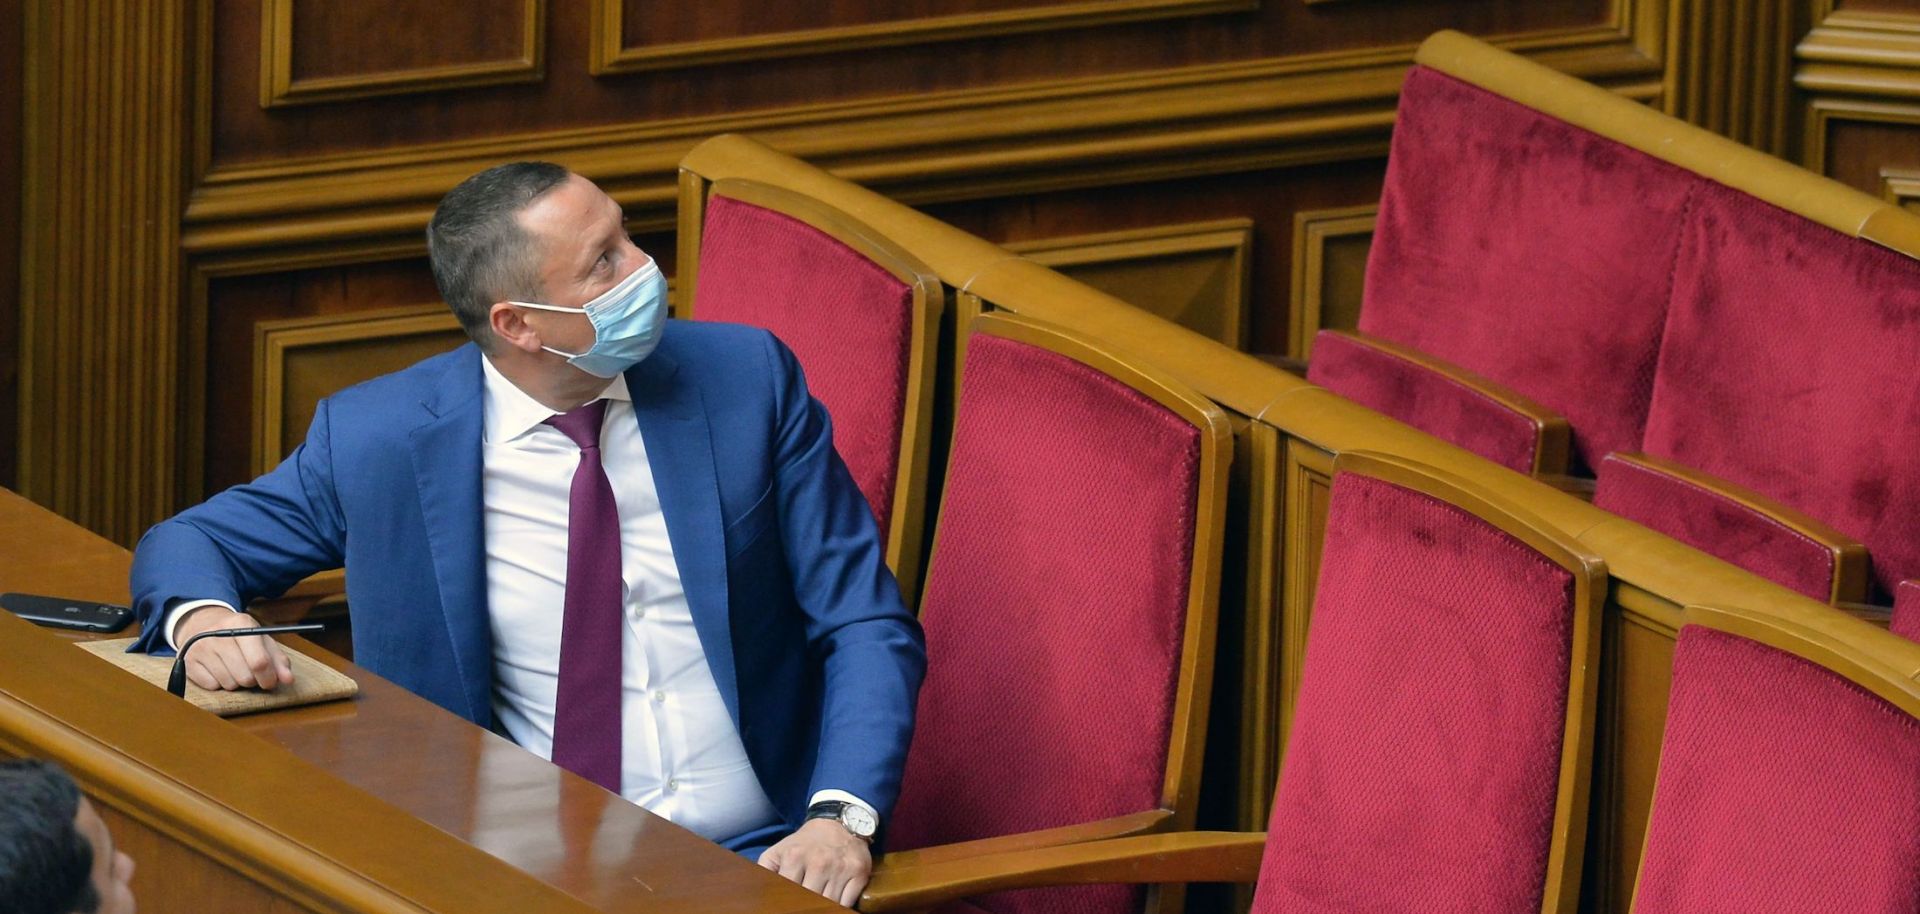 Ukraine's new central bank chief, Kyrylo Shevchenko, wears a face mask as he watches lawmakers vote on his candidacy during a parliamentary session on July 16, 2020.